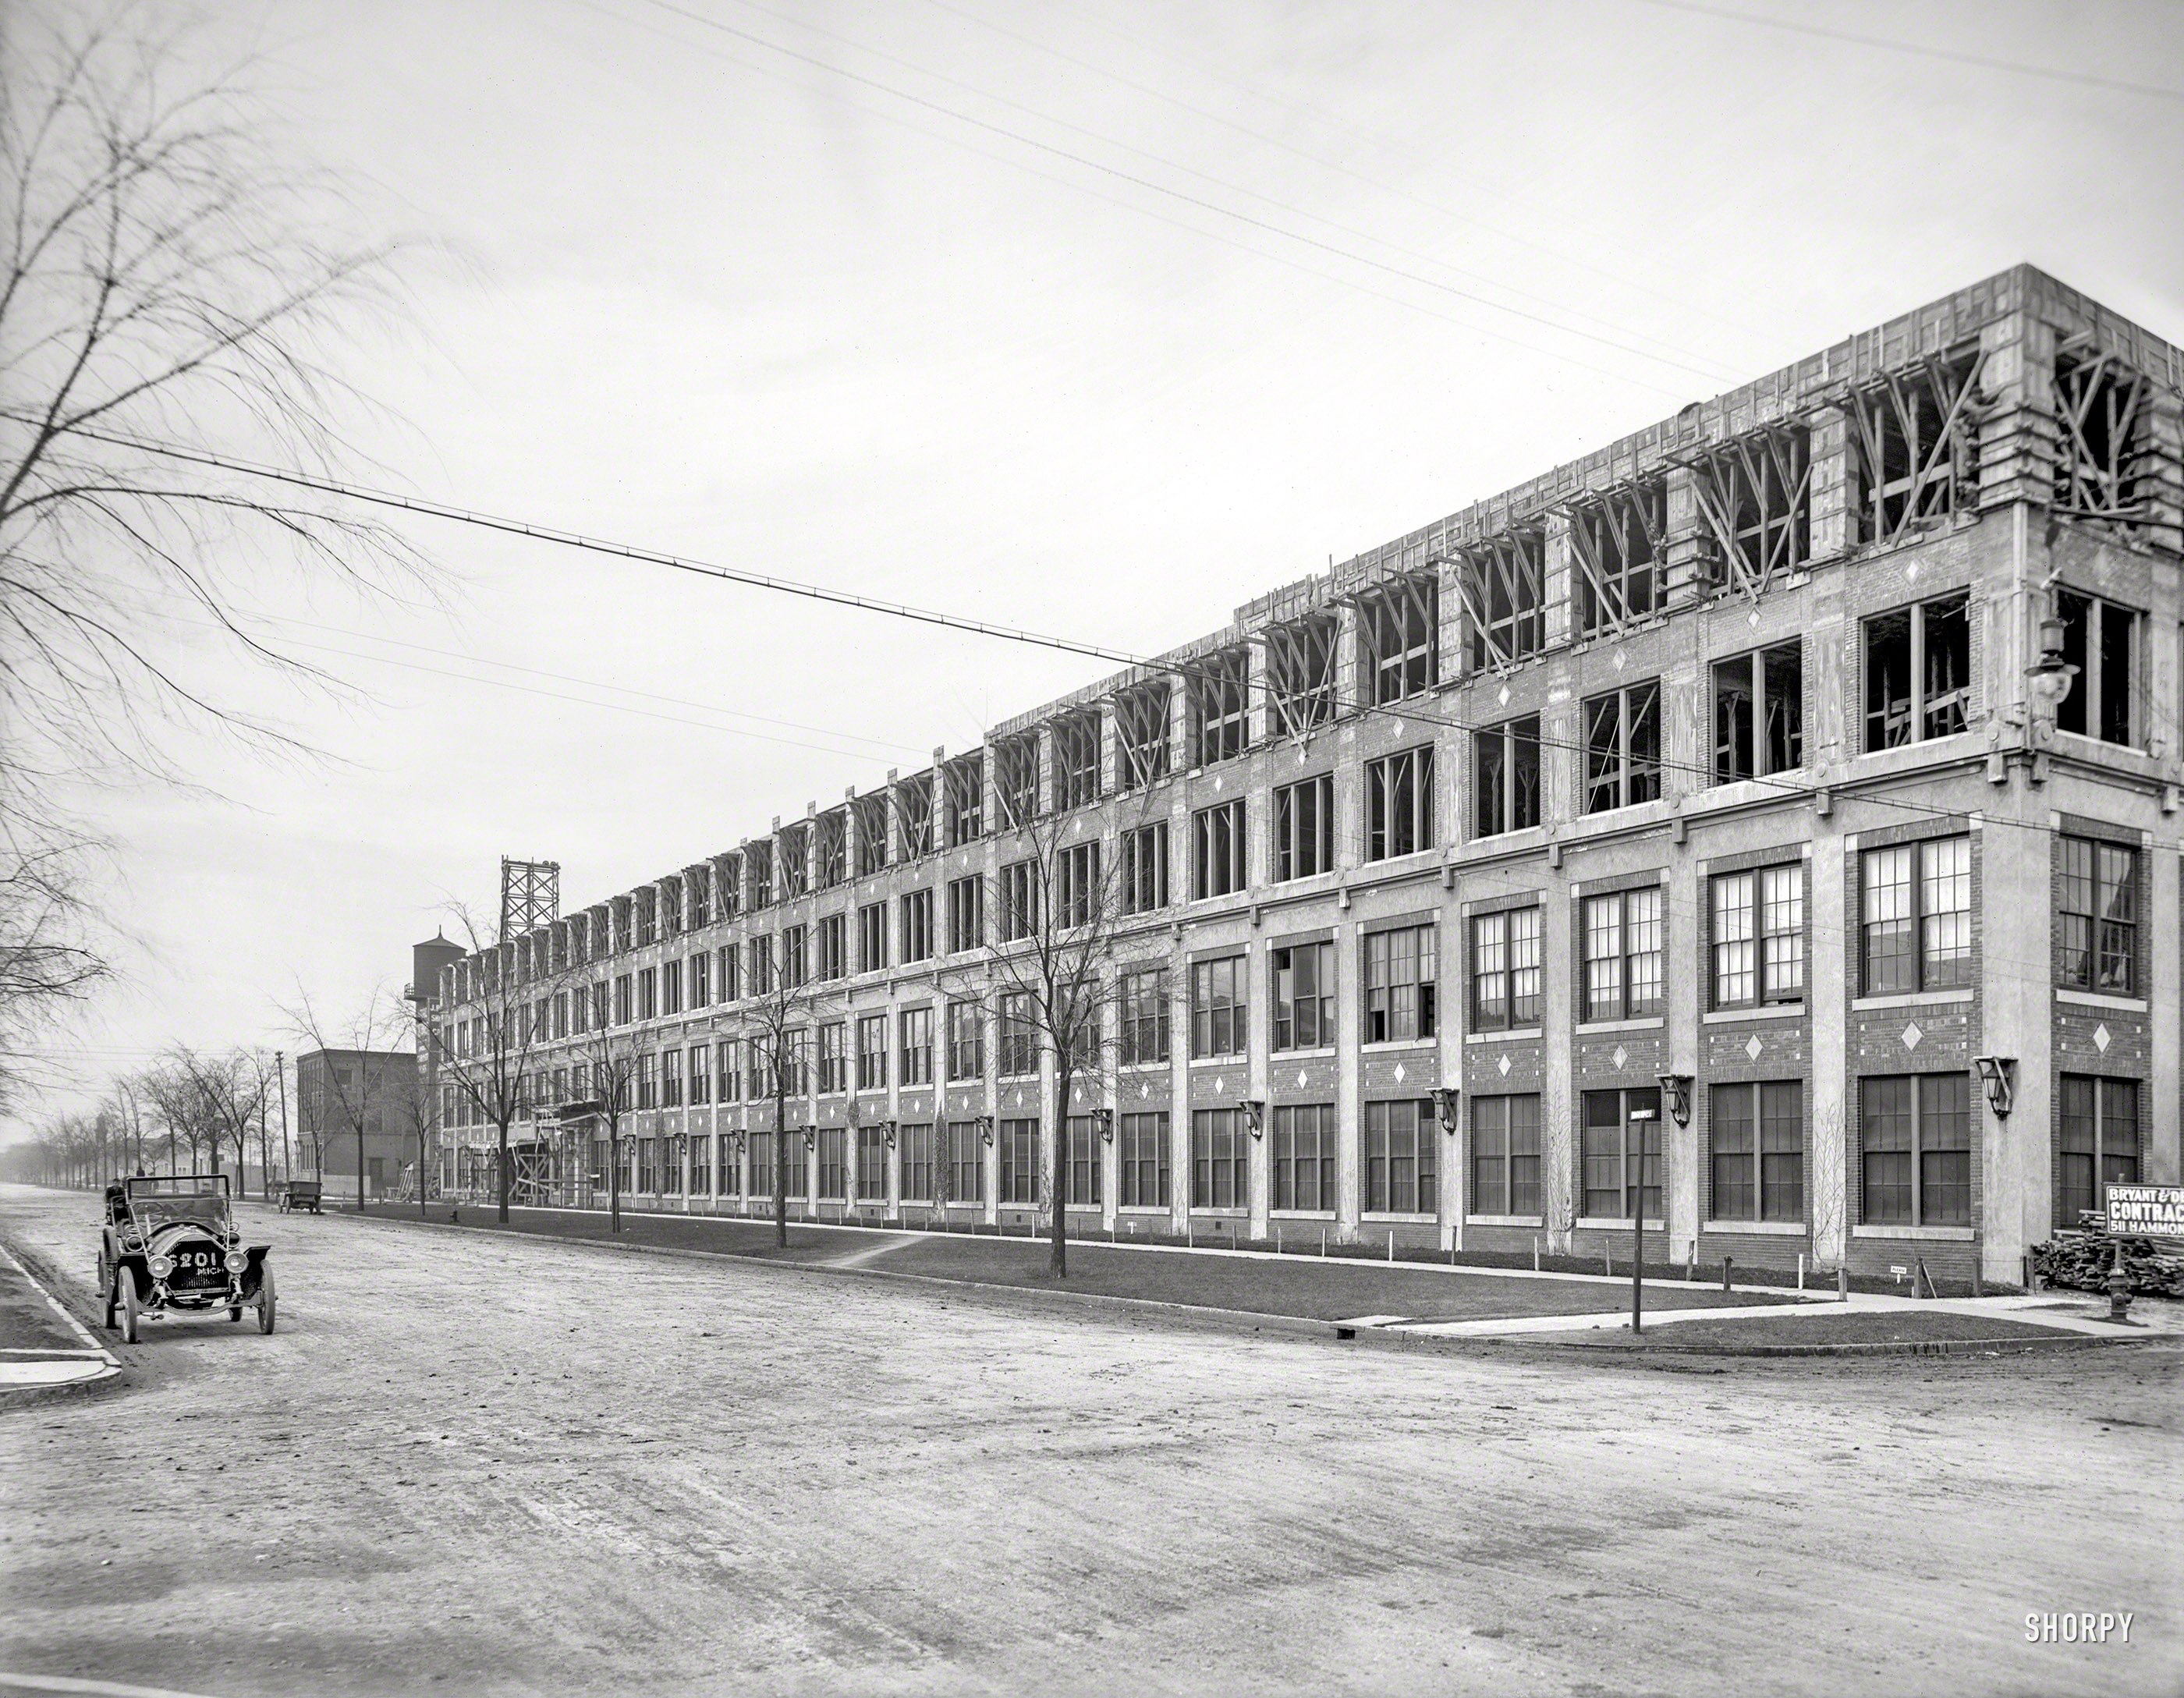 Detroit circa 1911. "Boulevard view, Packard auto plant." At least two laborers are hard at work in our second look at the expansion of Albert Kahn's factory from two stories to four, at the spot where a bridge was eventually built over Grand Boulevard, connecting this building with one across the street. View full size.